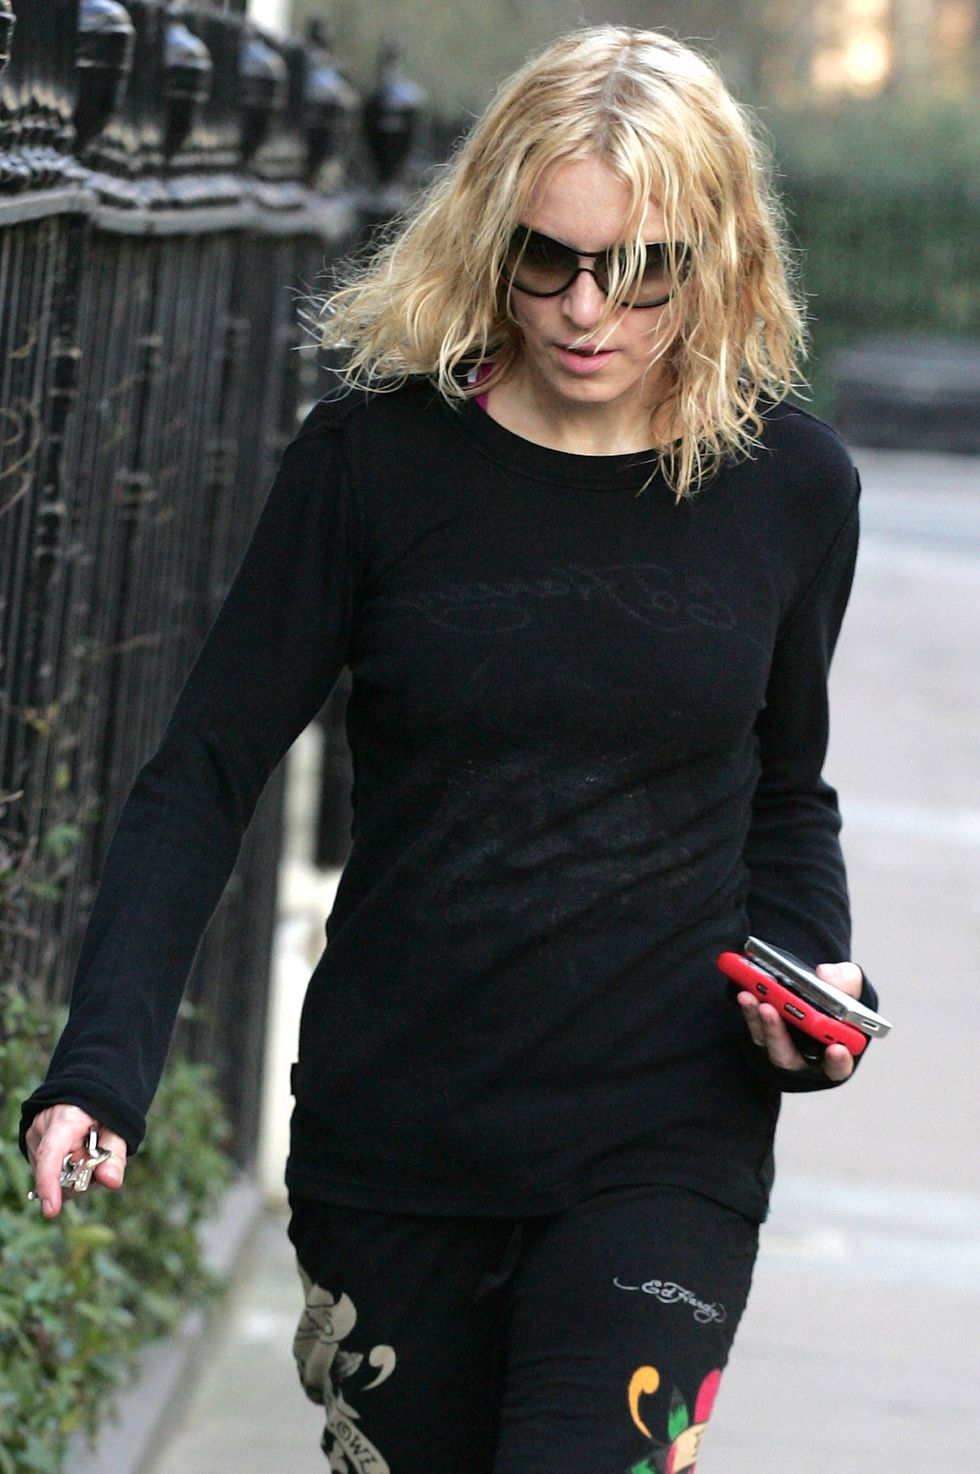 Madonna sighted visiting gym on January 28, 2008 in London, England